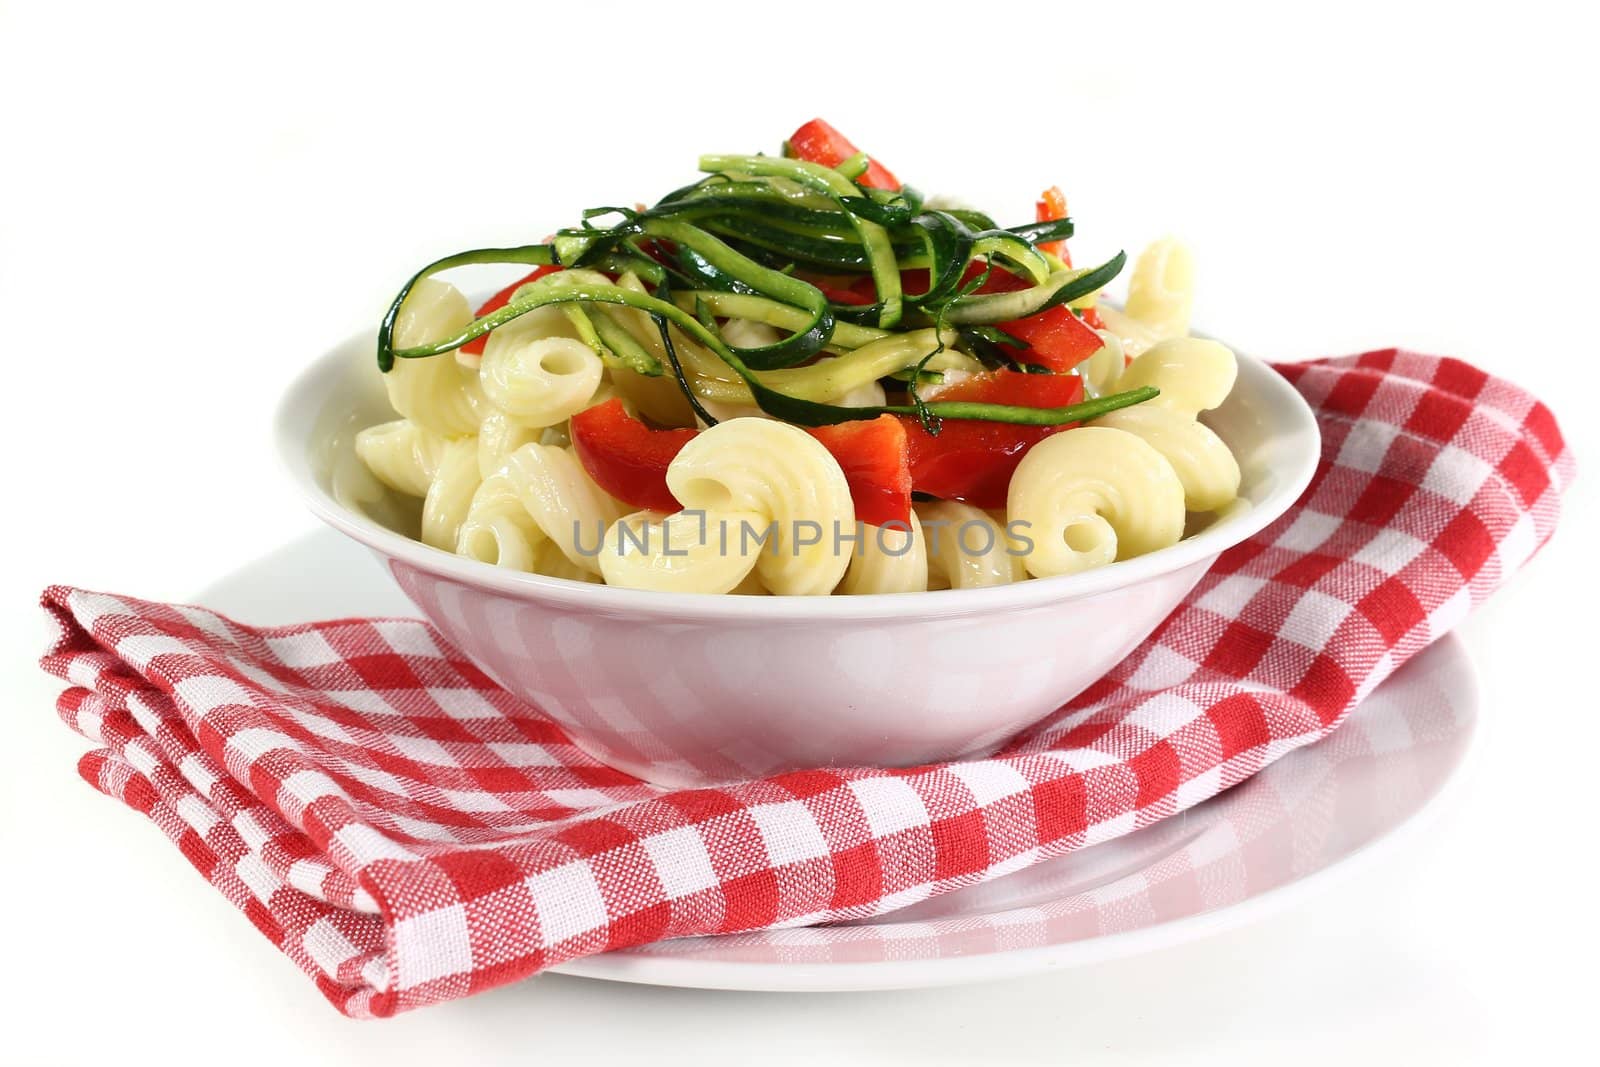 a dish with a vegetarian pasta dish